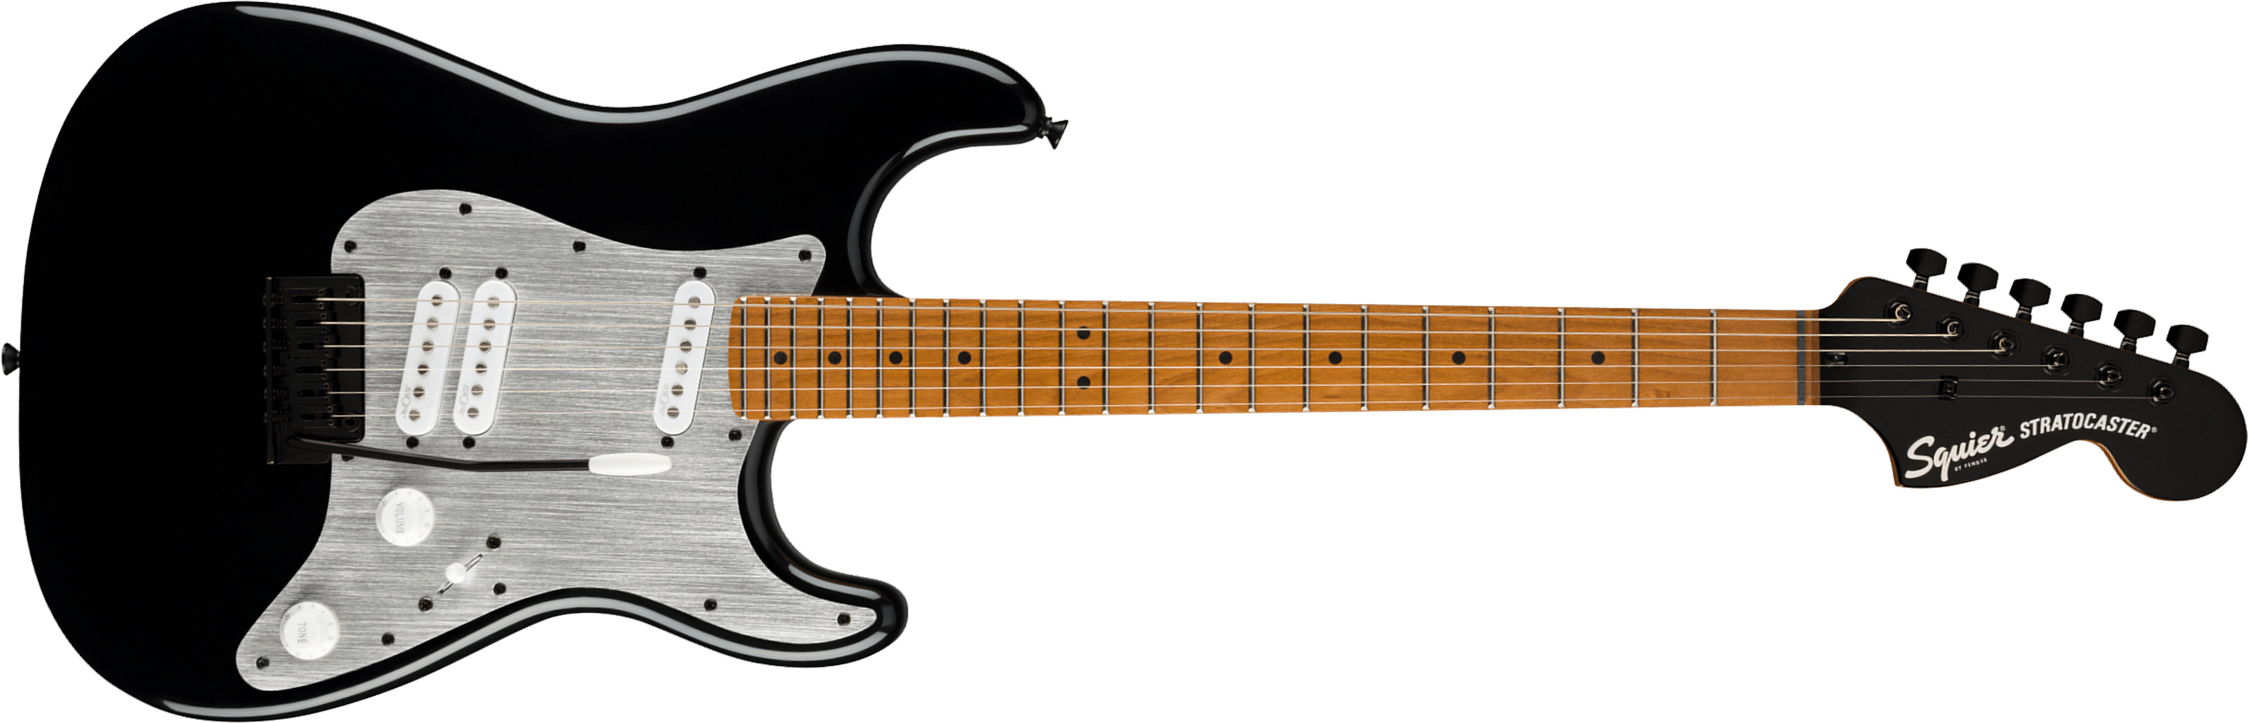 Squier Strat Contemporary Special Sss Trem Mn - Black - Str shape electric guitar - Main picture